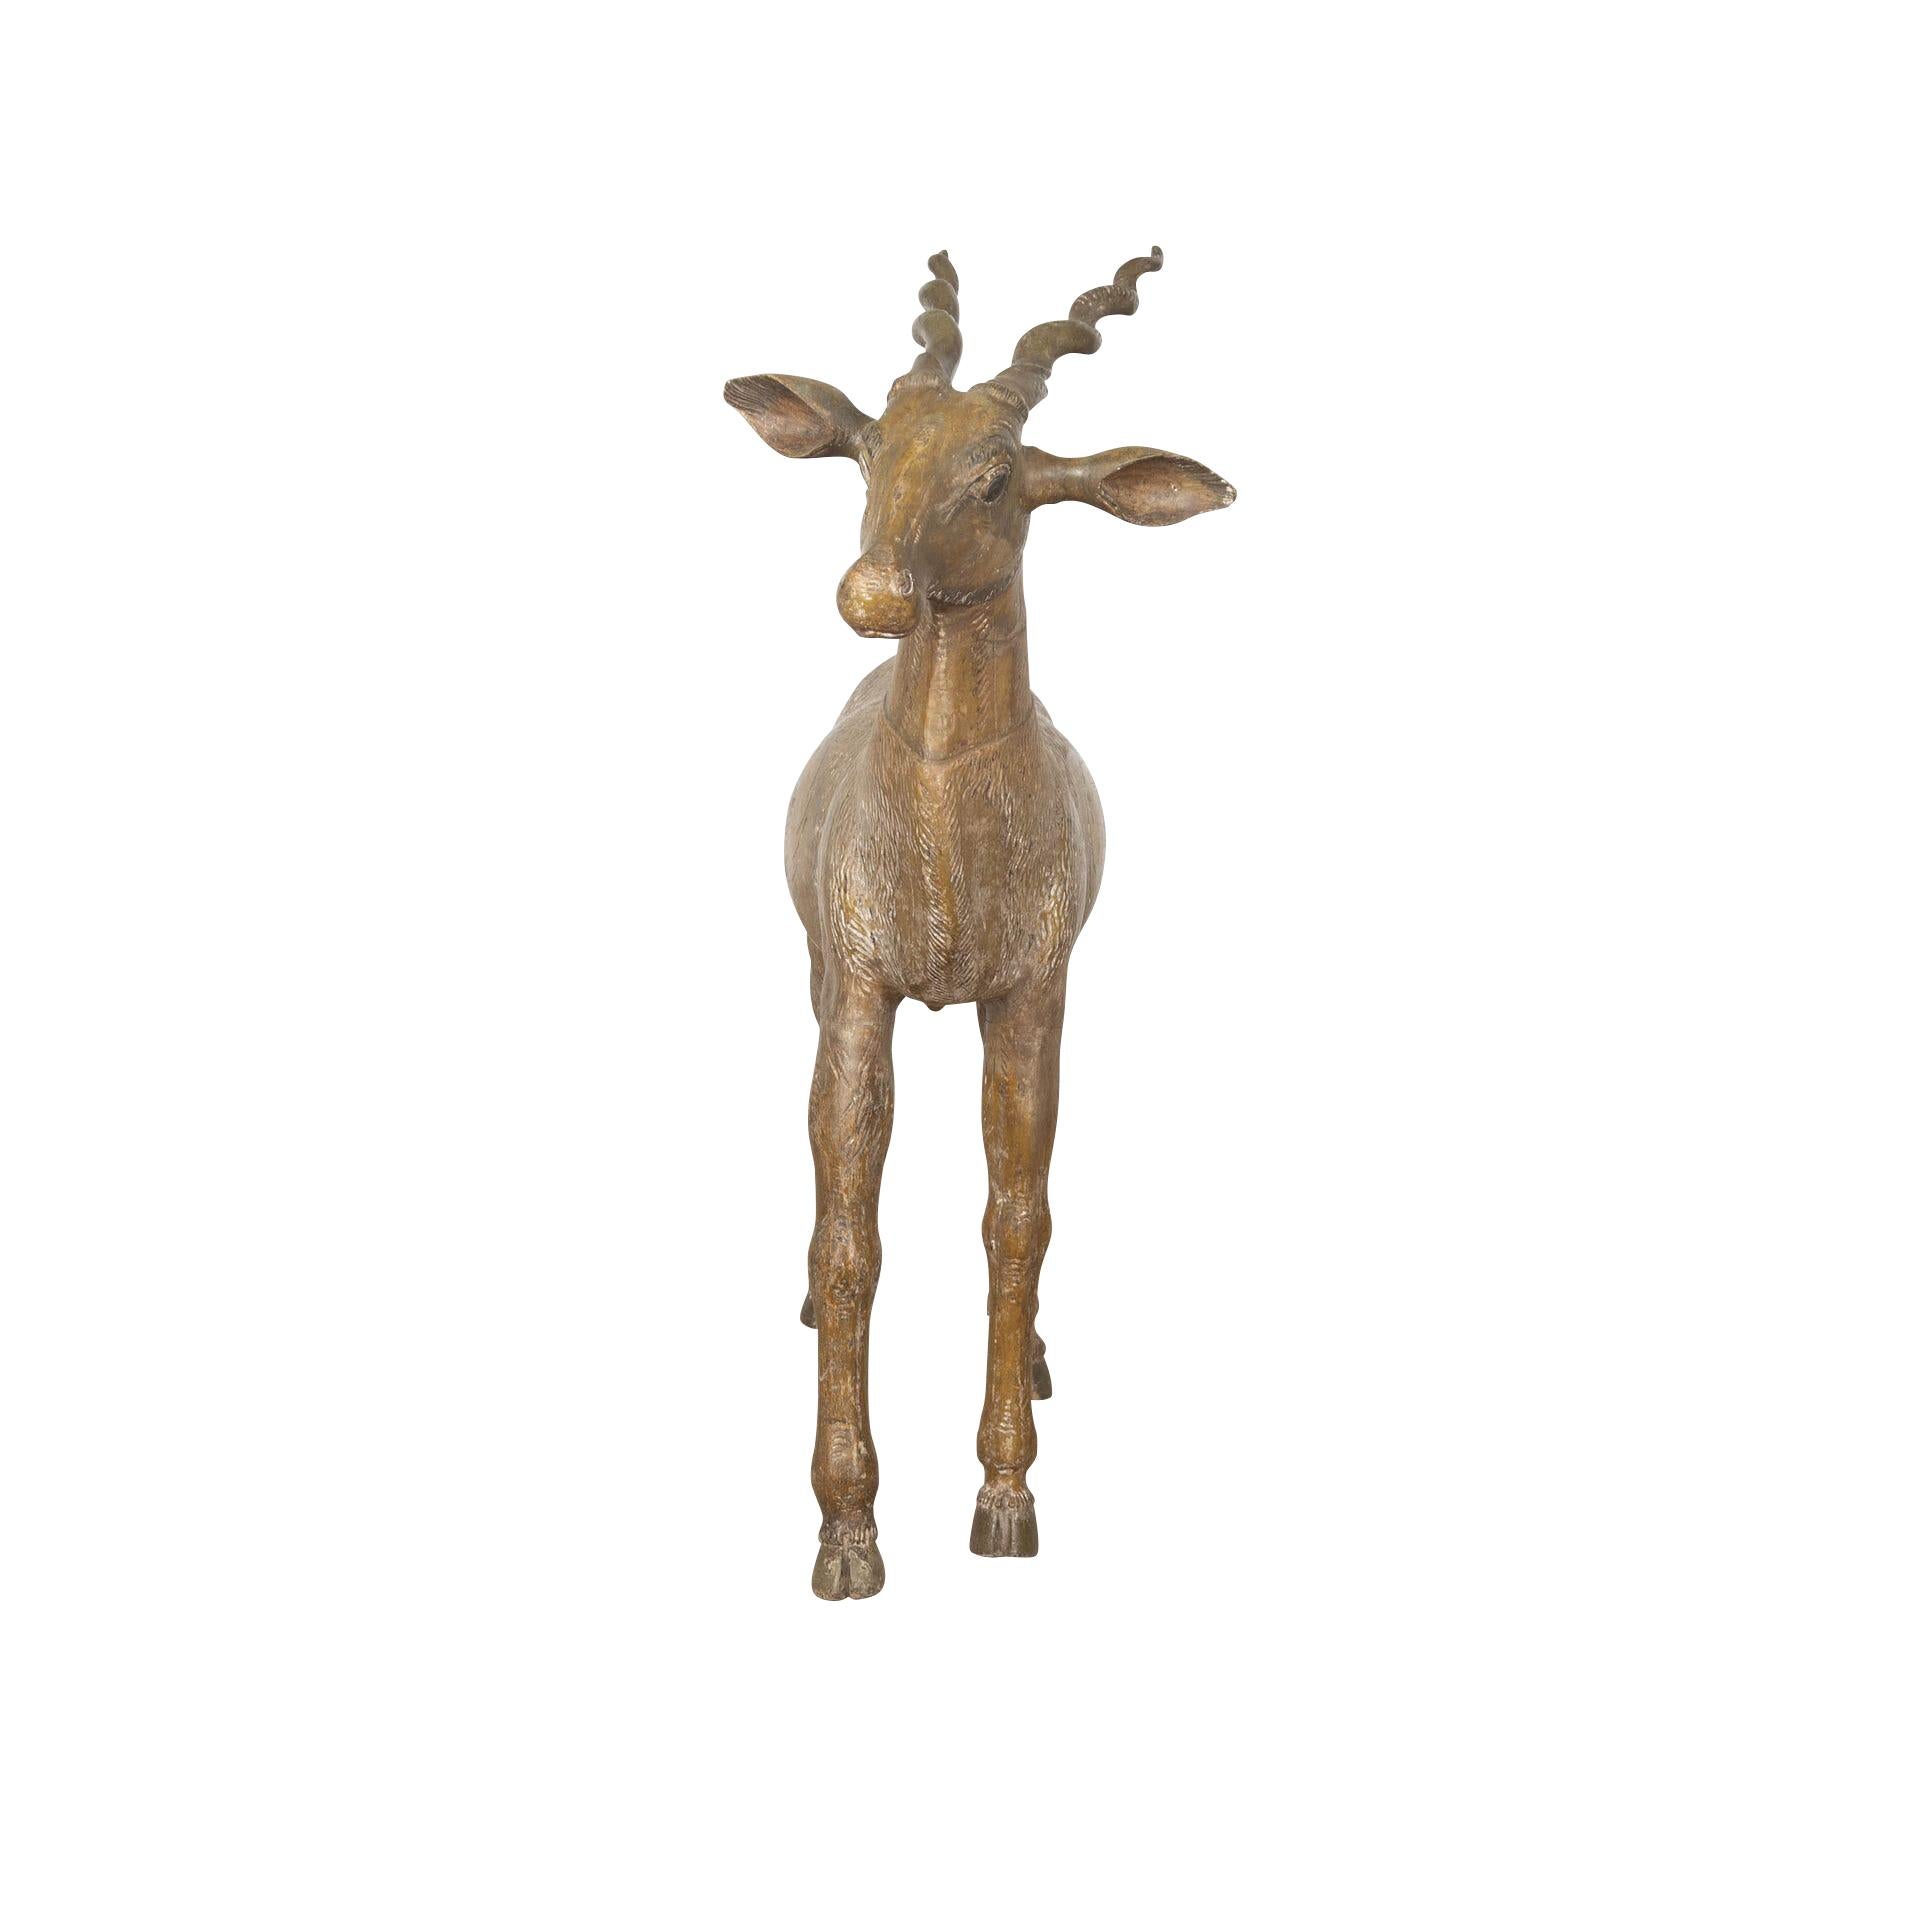 Lifesize 19th Century Quirky Carved Wood Antelope In Good Condition For Sale In Shipston-On-Stour, GB